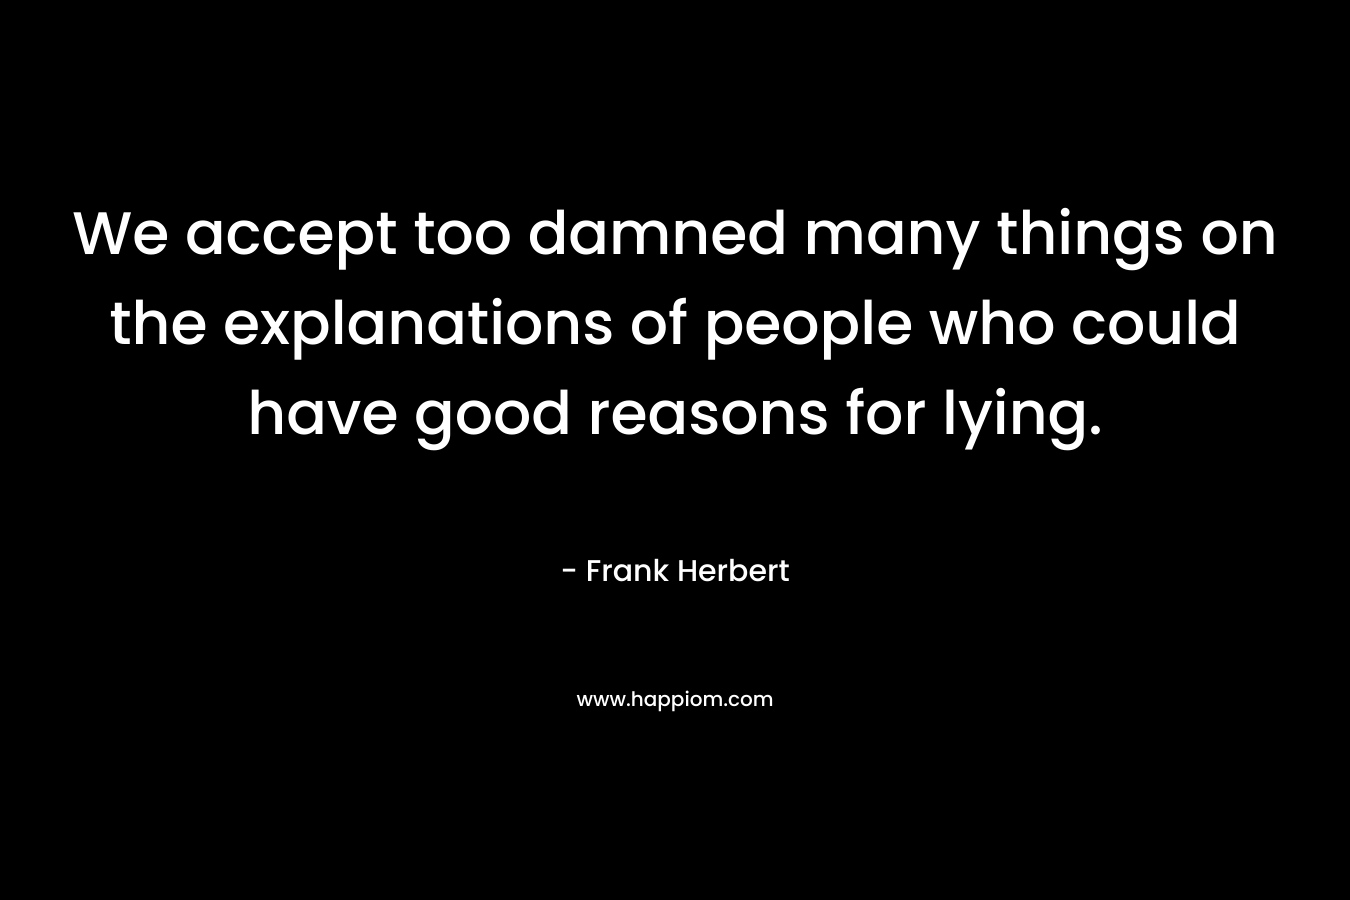 We accept too damned many things on the explanations of people who could have good reasons for lying.